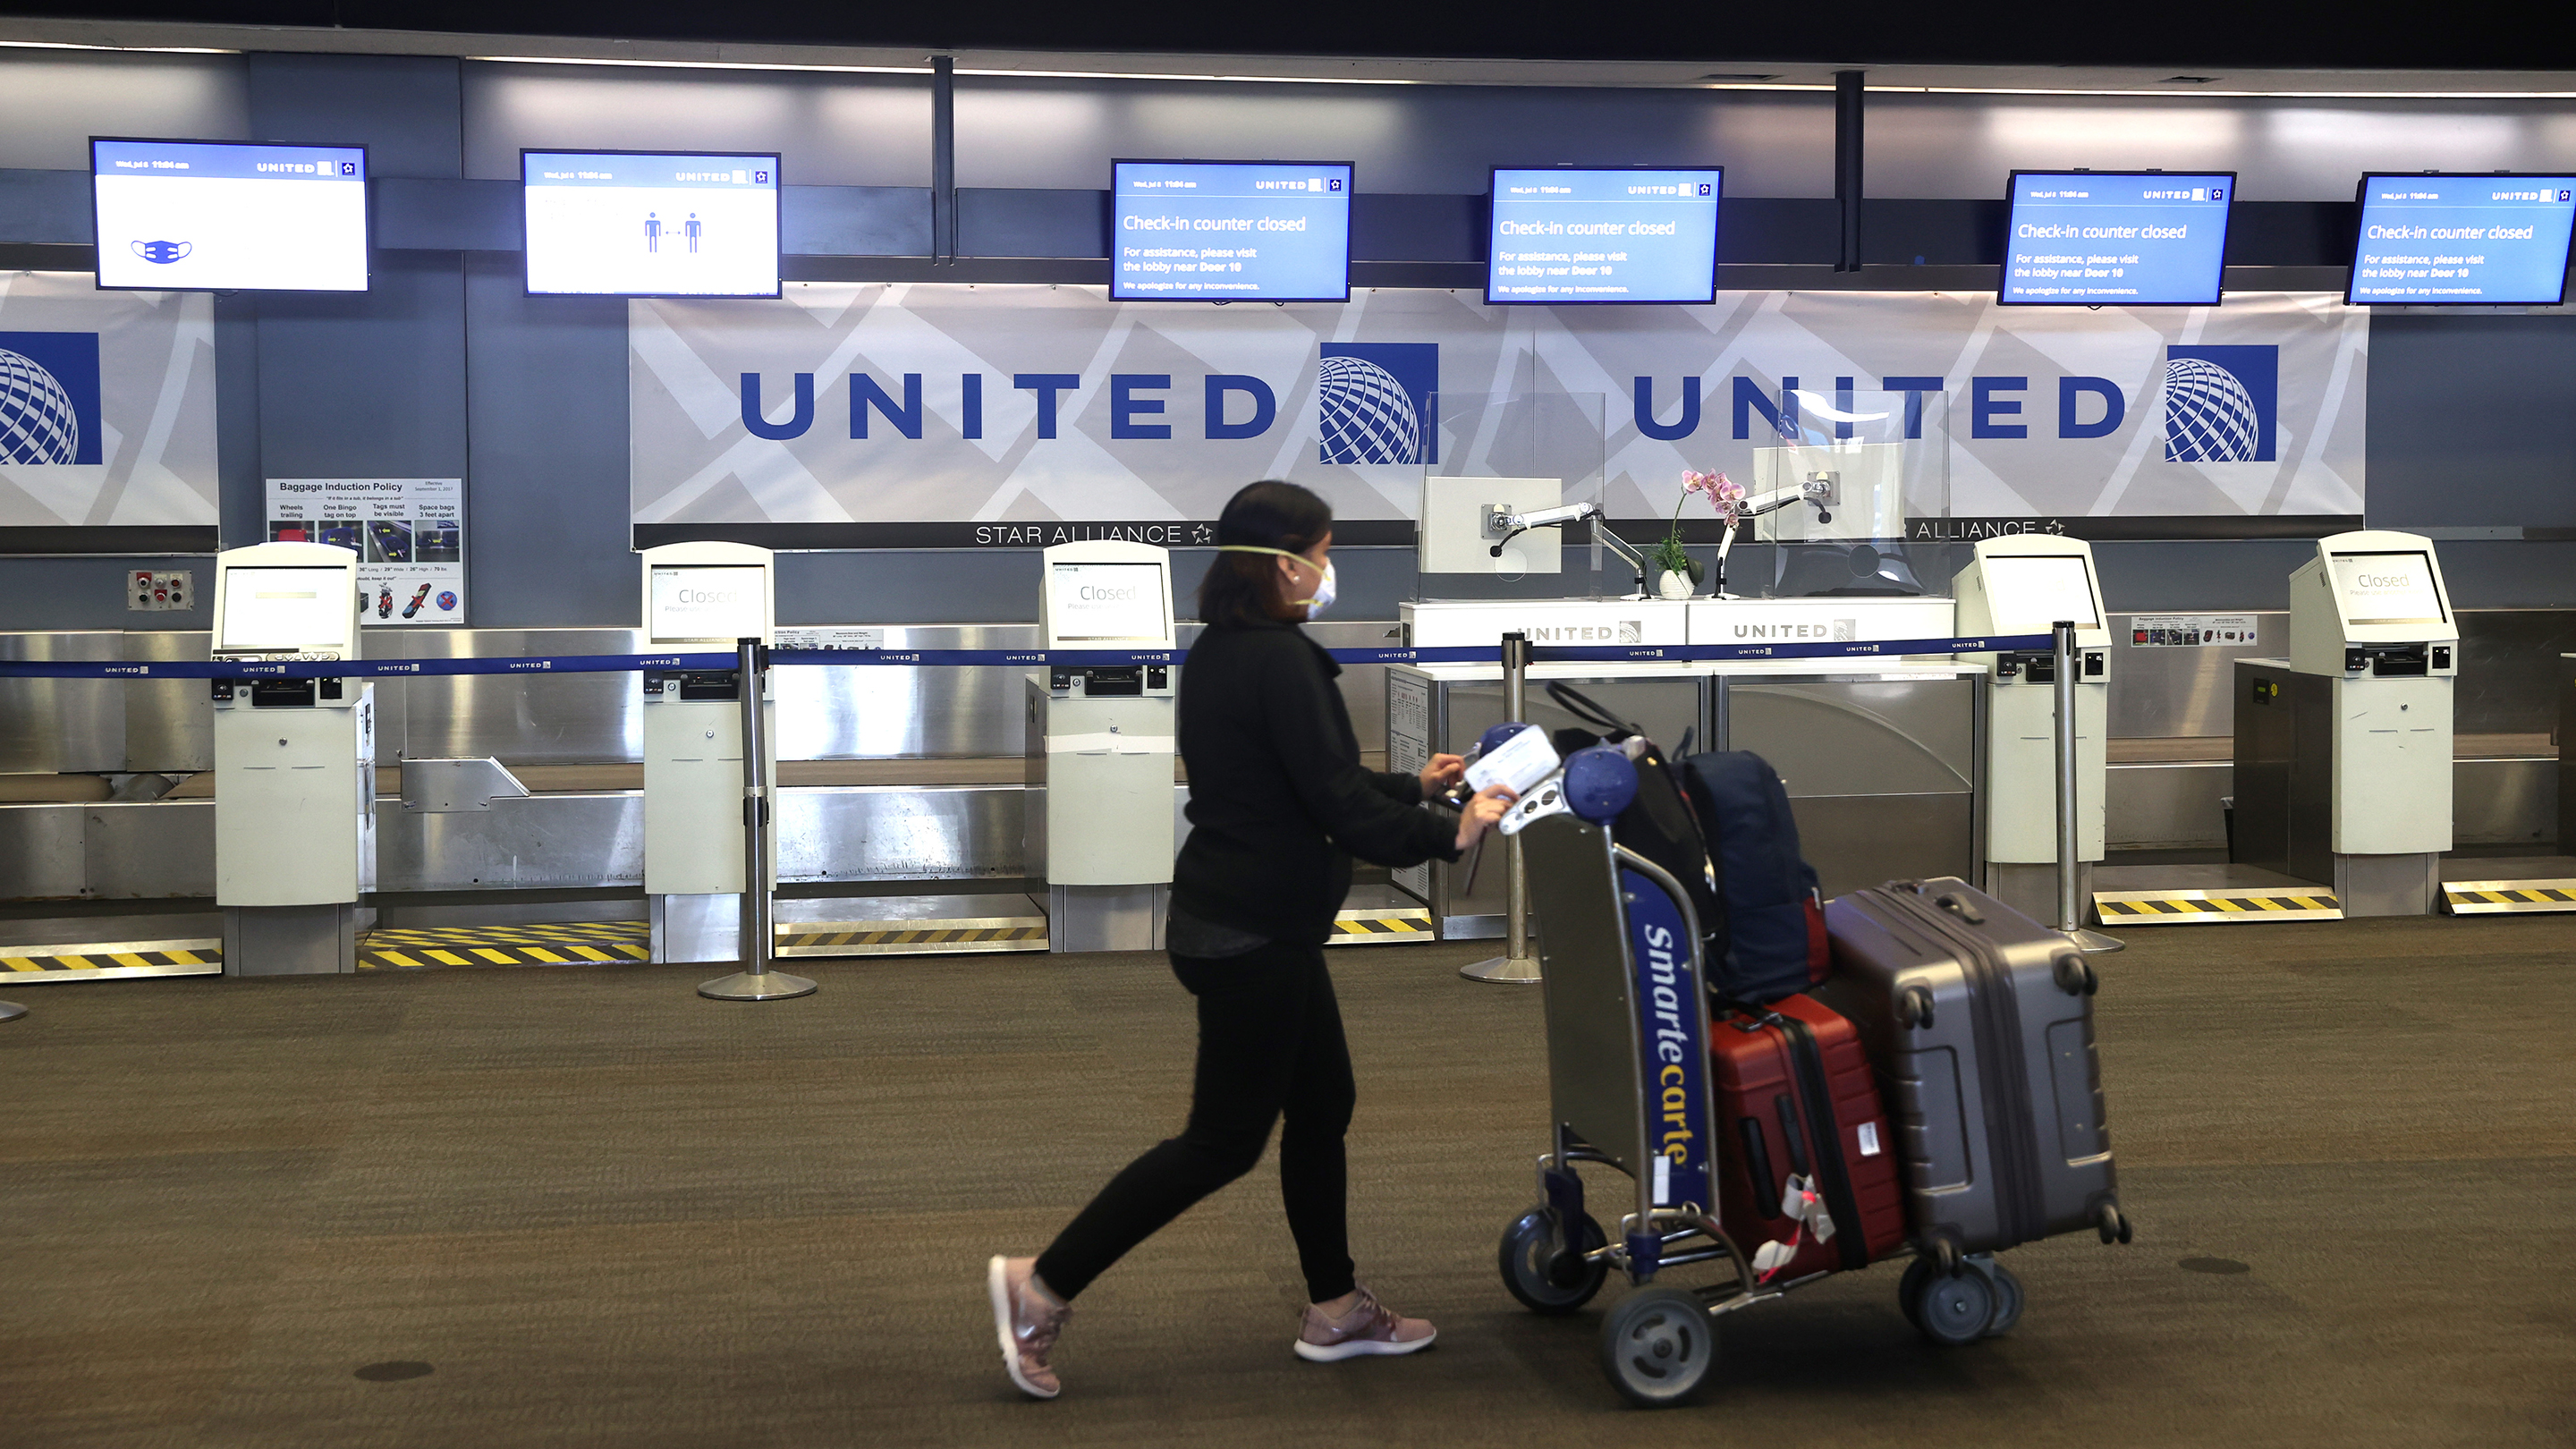 United Airlines Drops Ticket Change Fees For Domestic Flights Marketplace,One Bedroom Apartment In Brooklyn Cost